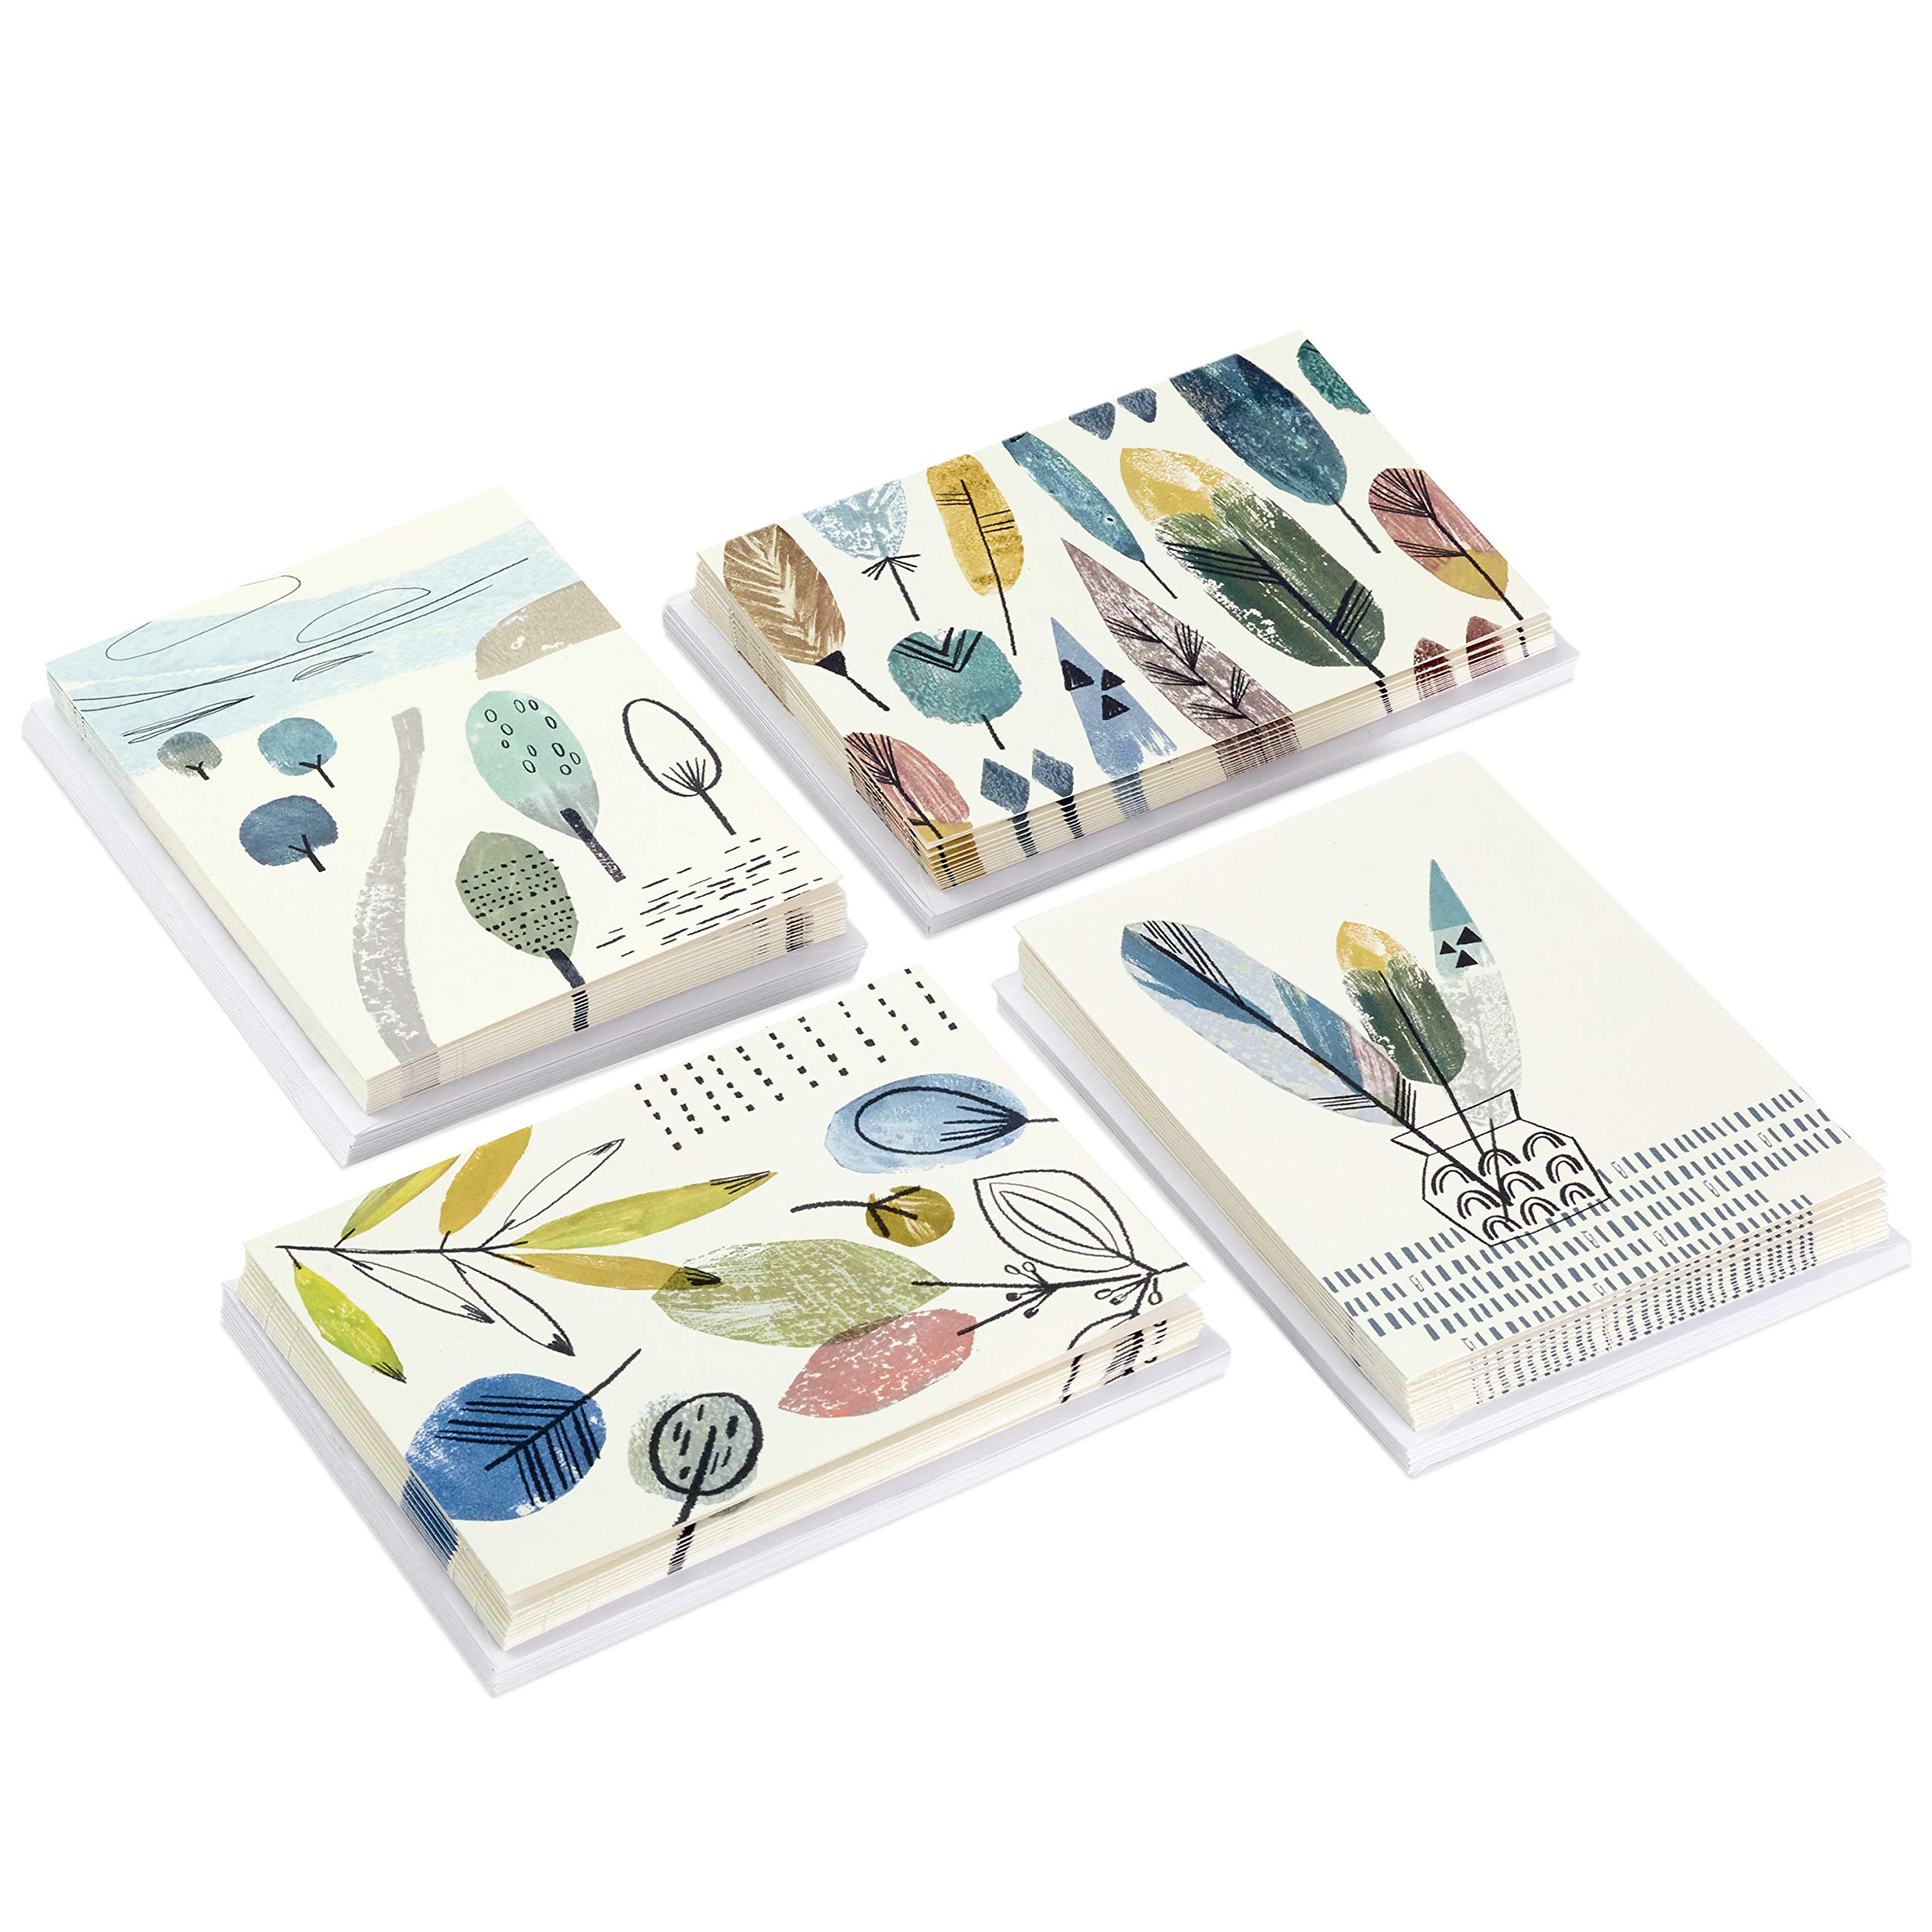 Hallmark Thank You Cards Assortment, Painted Florals (48 Cards with Envelopes for Baby Showers) & Blank Cards Assortment, Nature Prints (48 Cards with Envelopes)